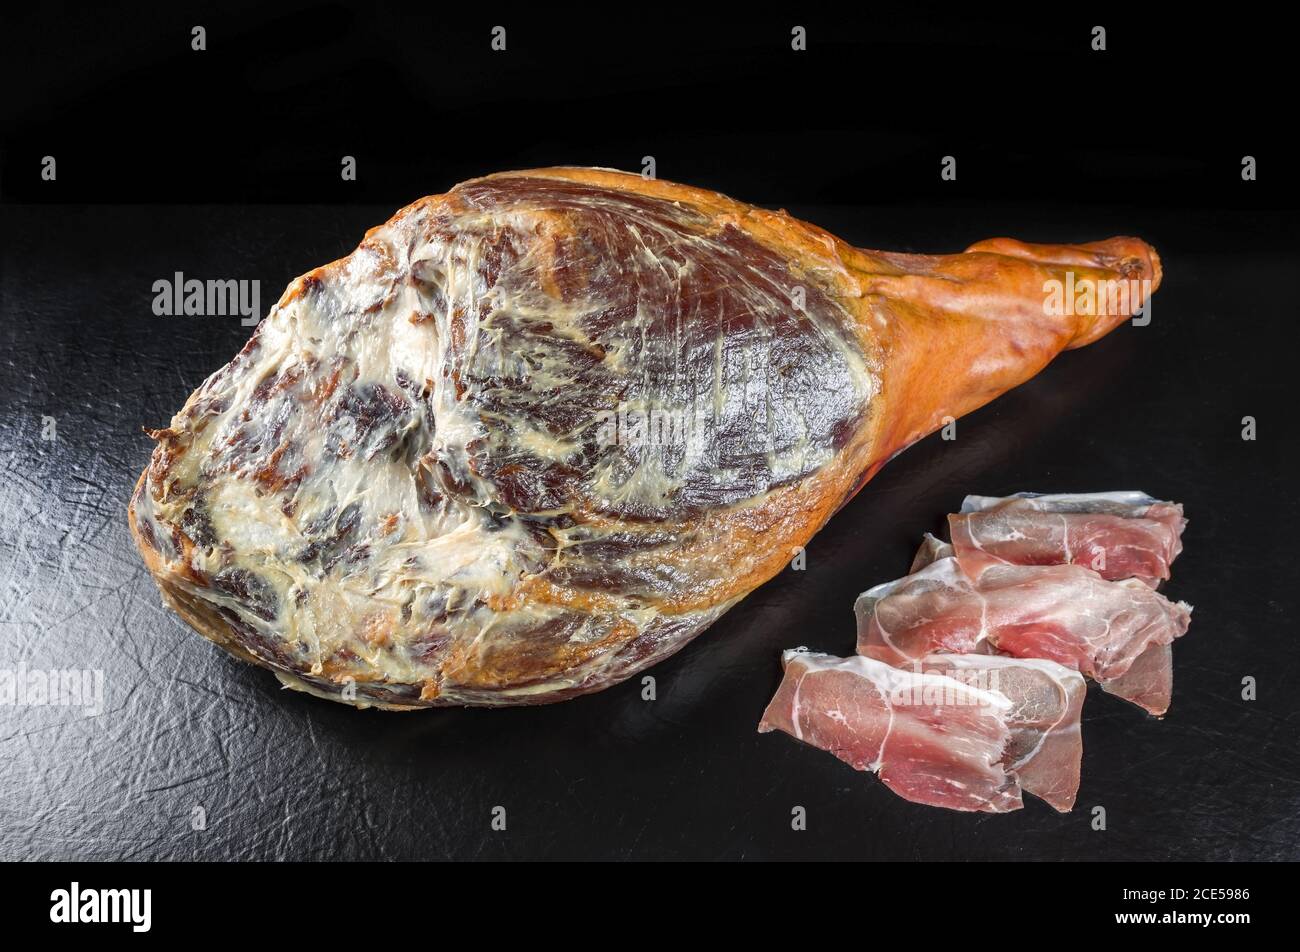 Traditional Spanish jamon Iberico dry aged haunch of a duroc pork as  closeup offered on black background Stock Photo - Alamy